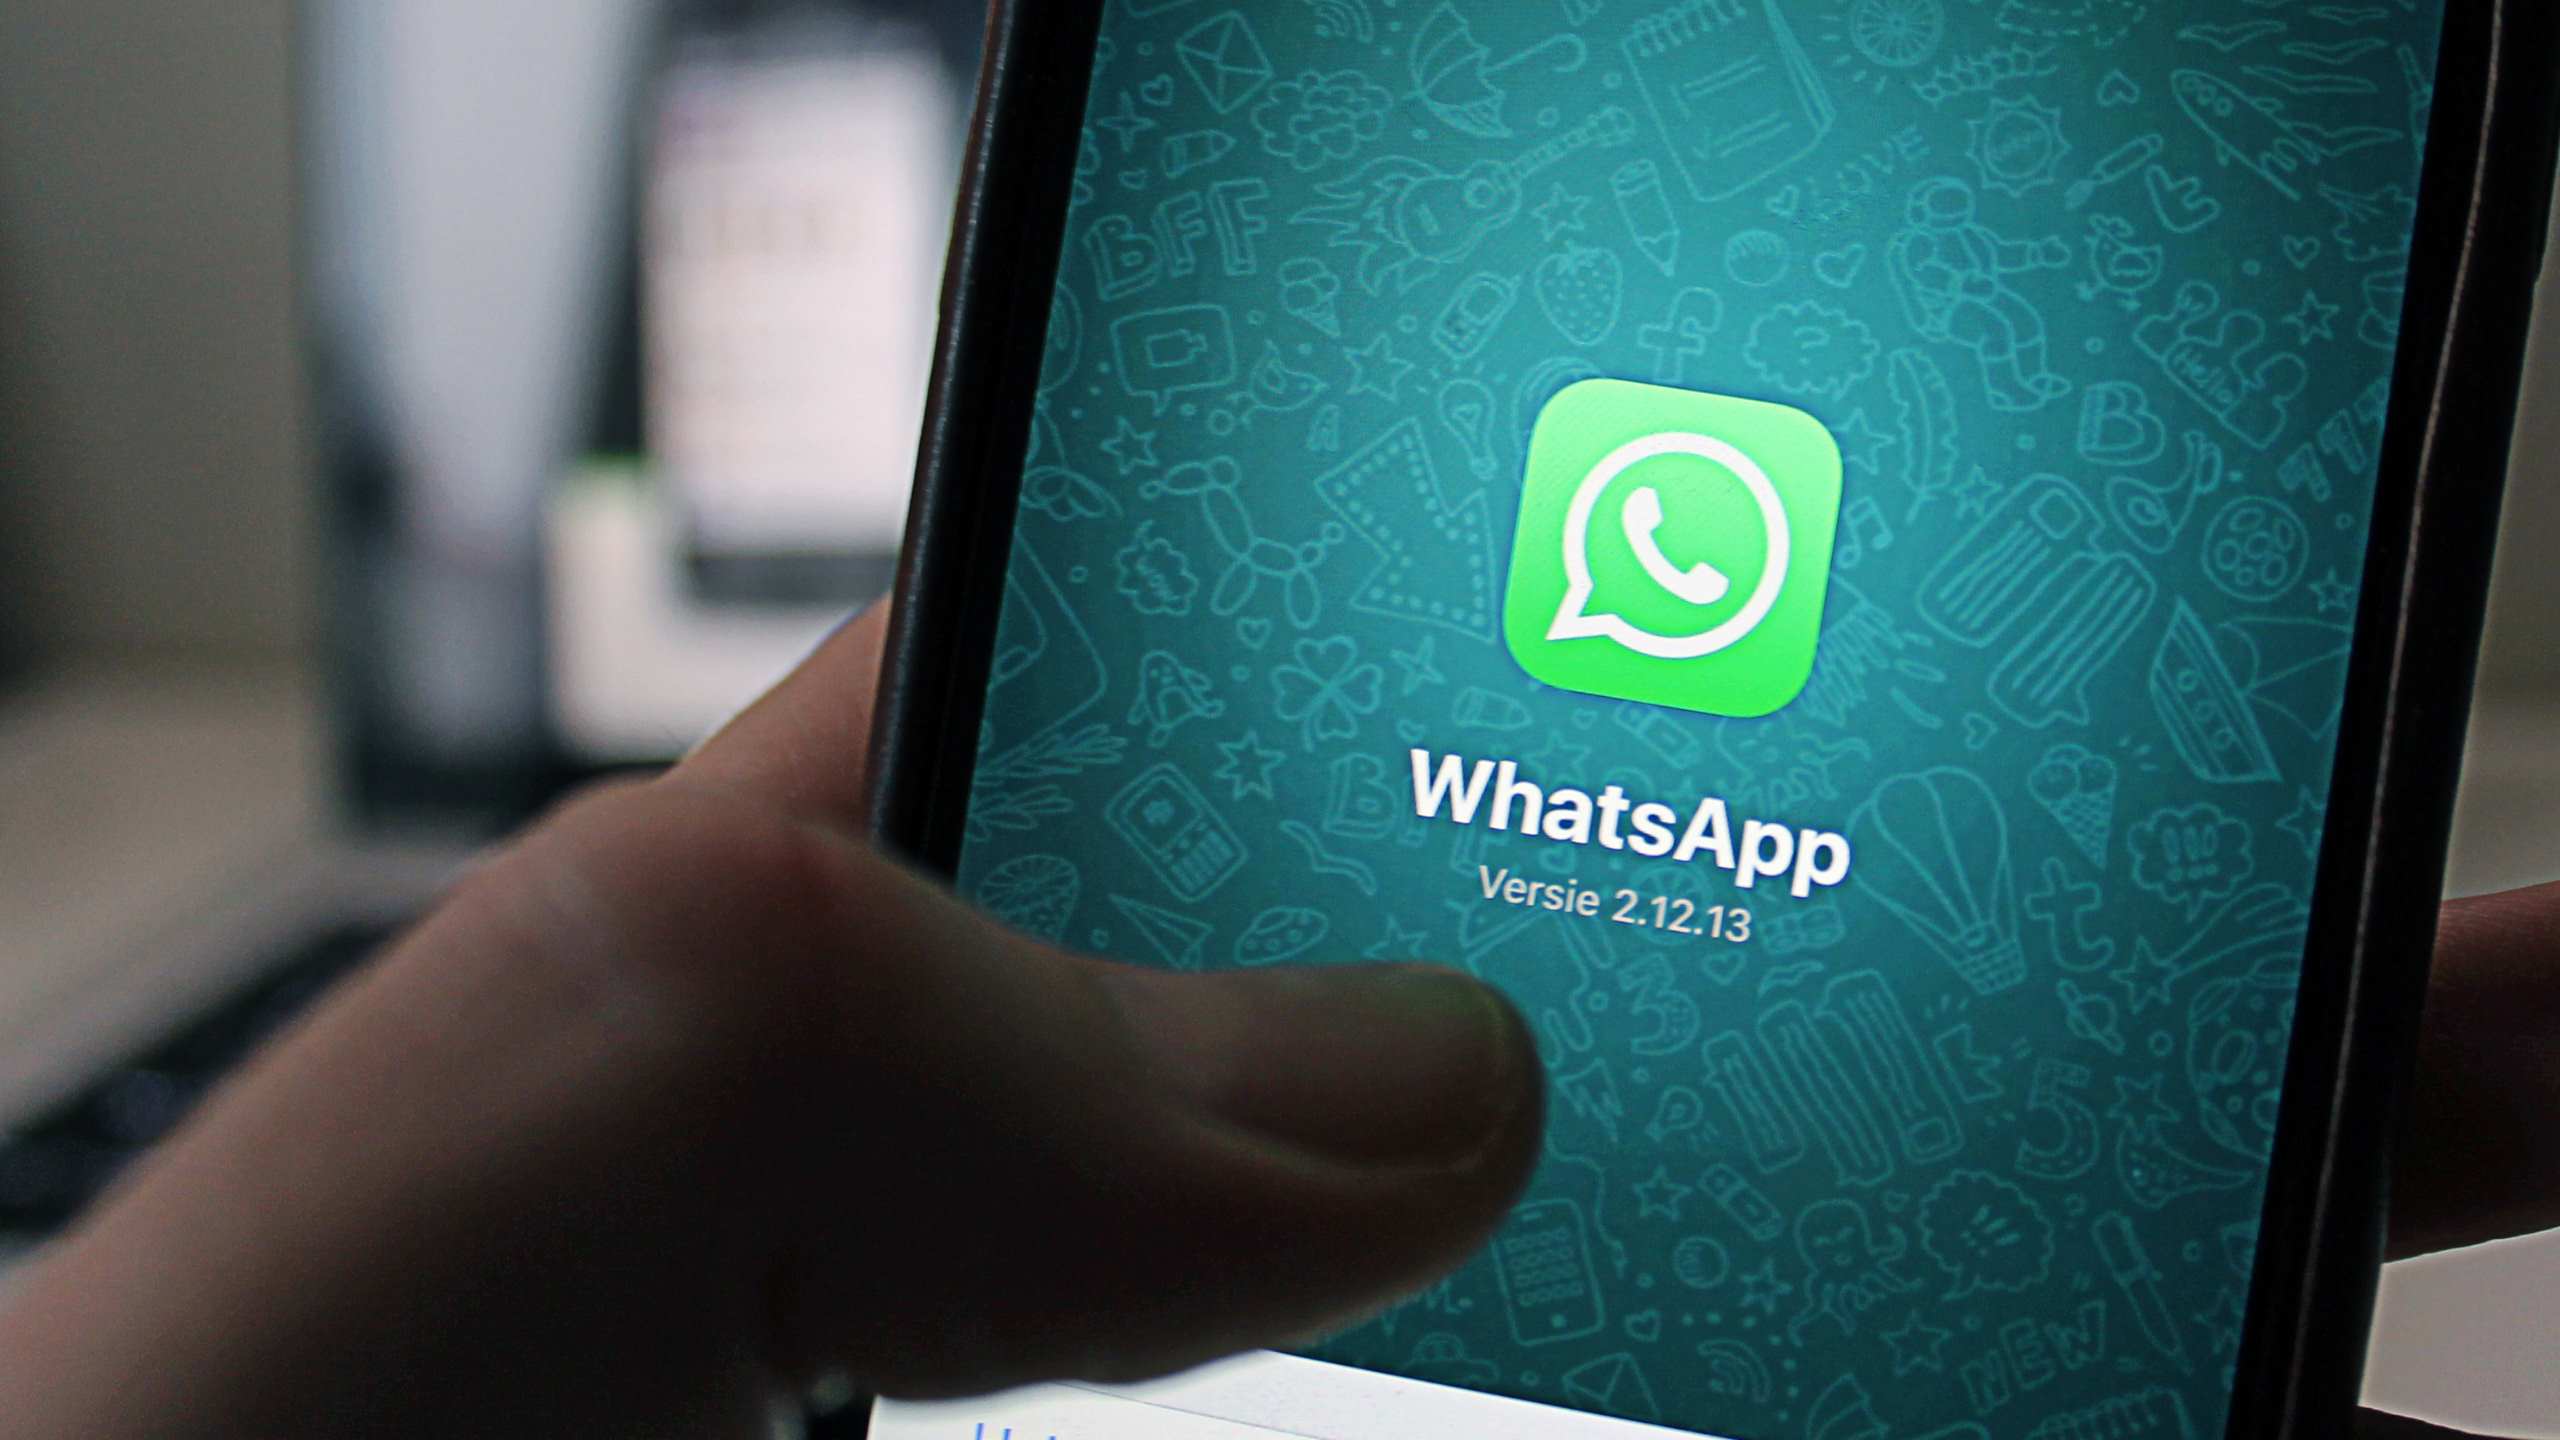 Your WhatsApp is being Registered on a New Device